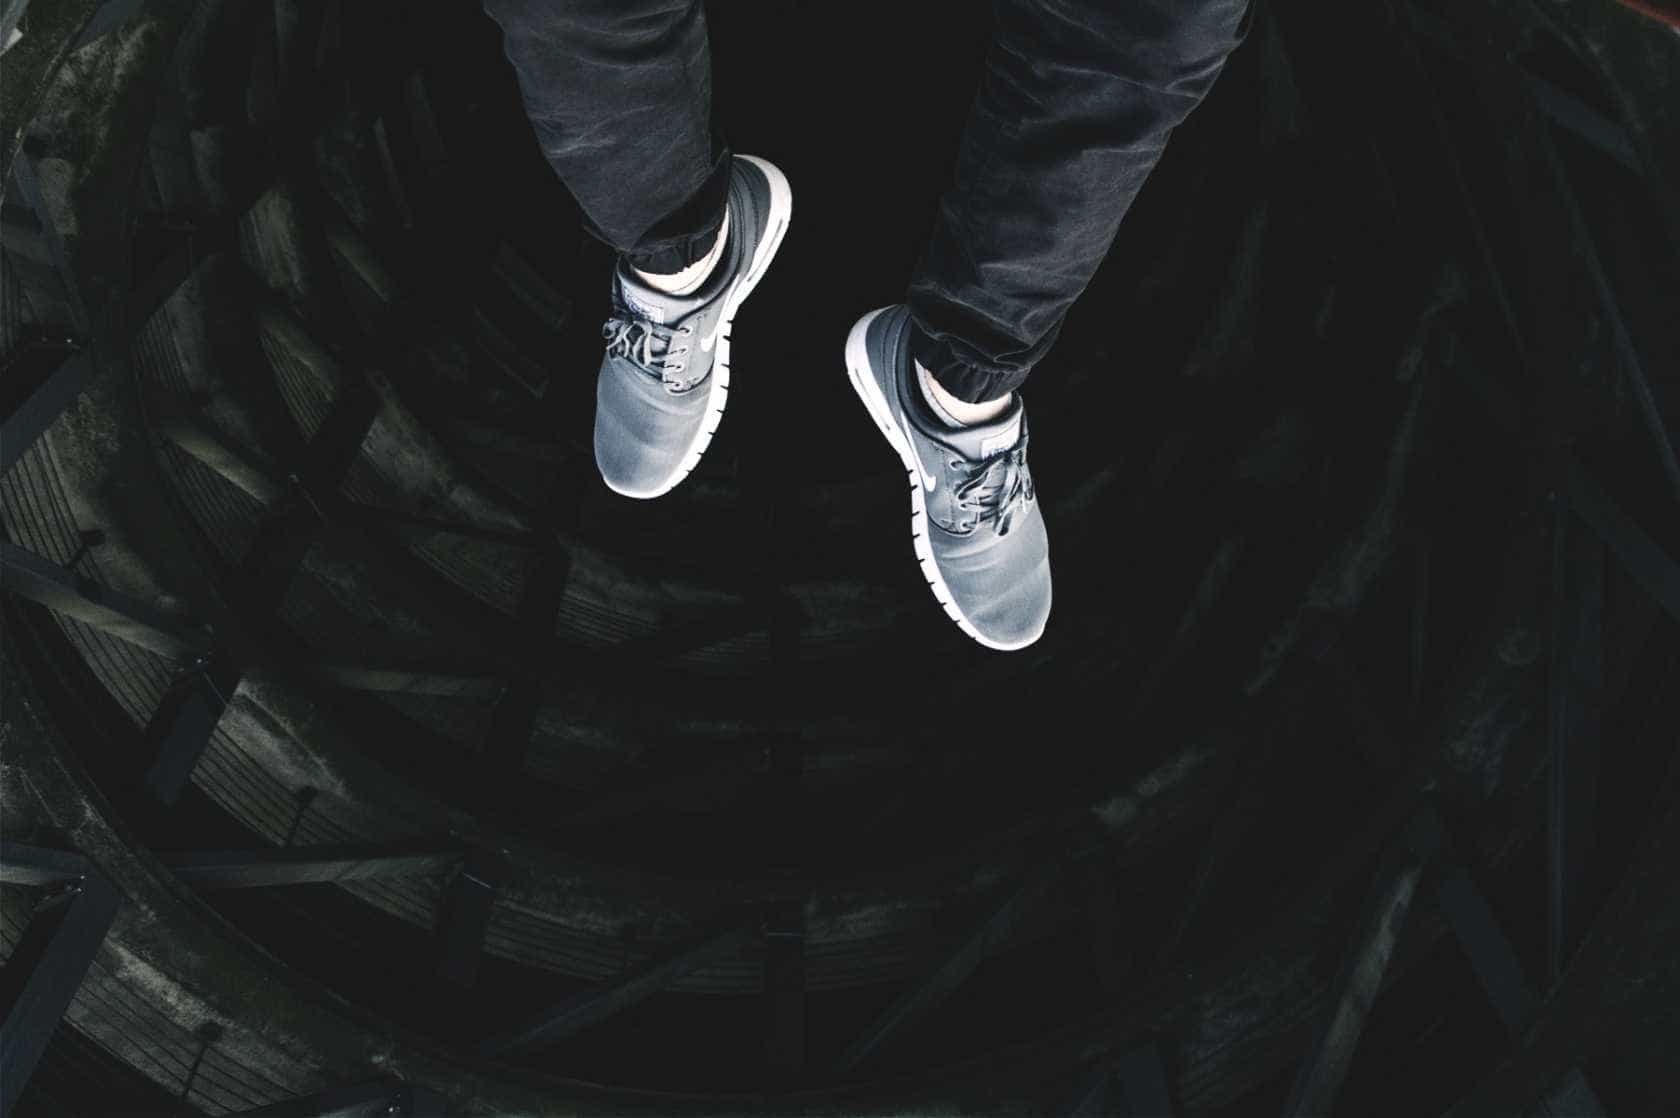 A man's feet, looking down from the top of a building